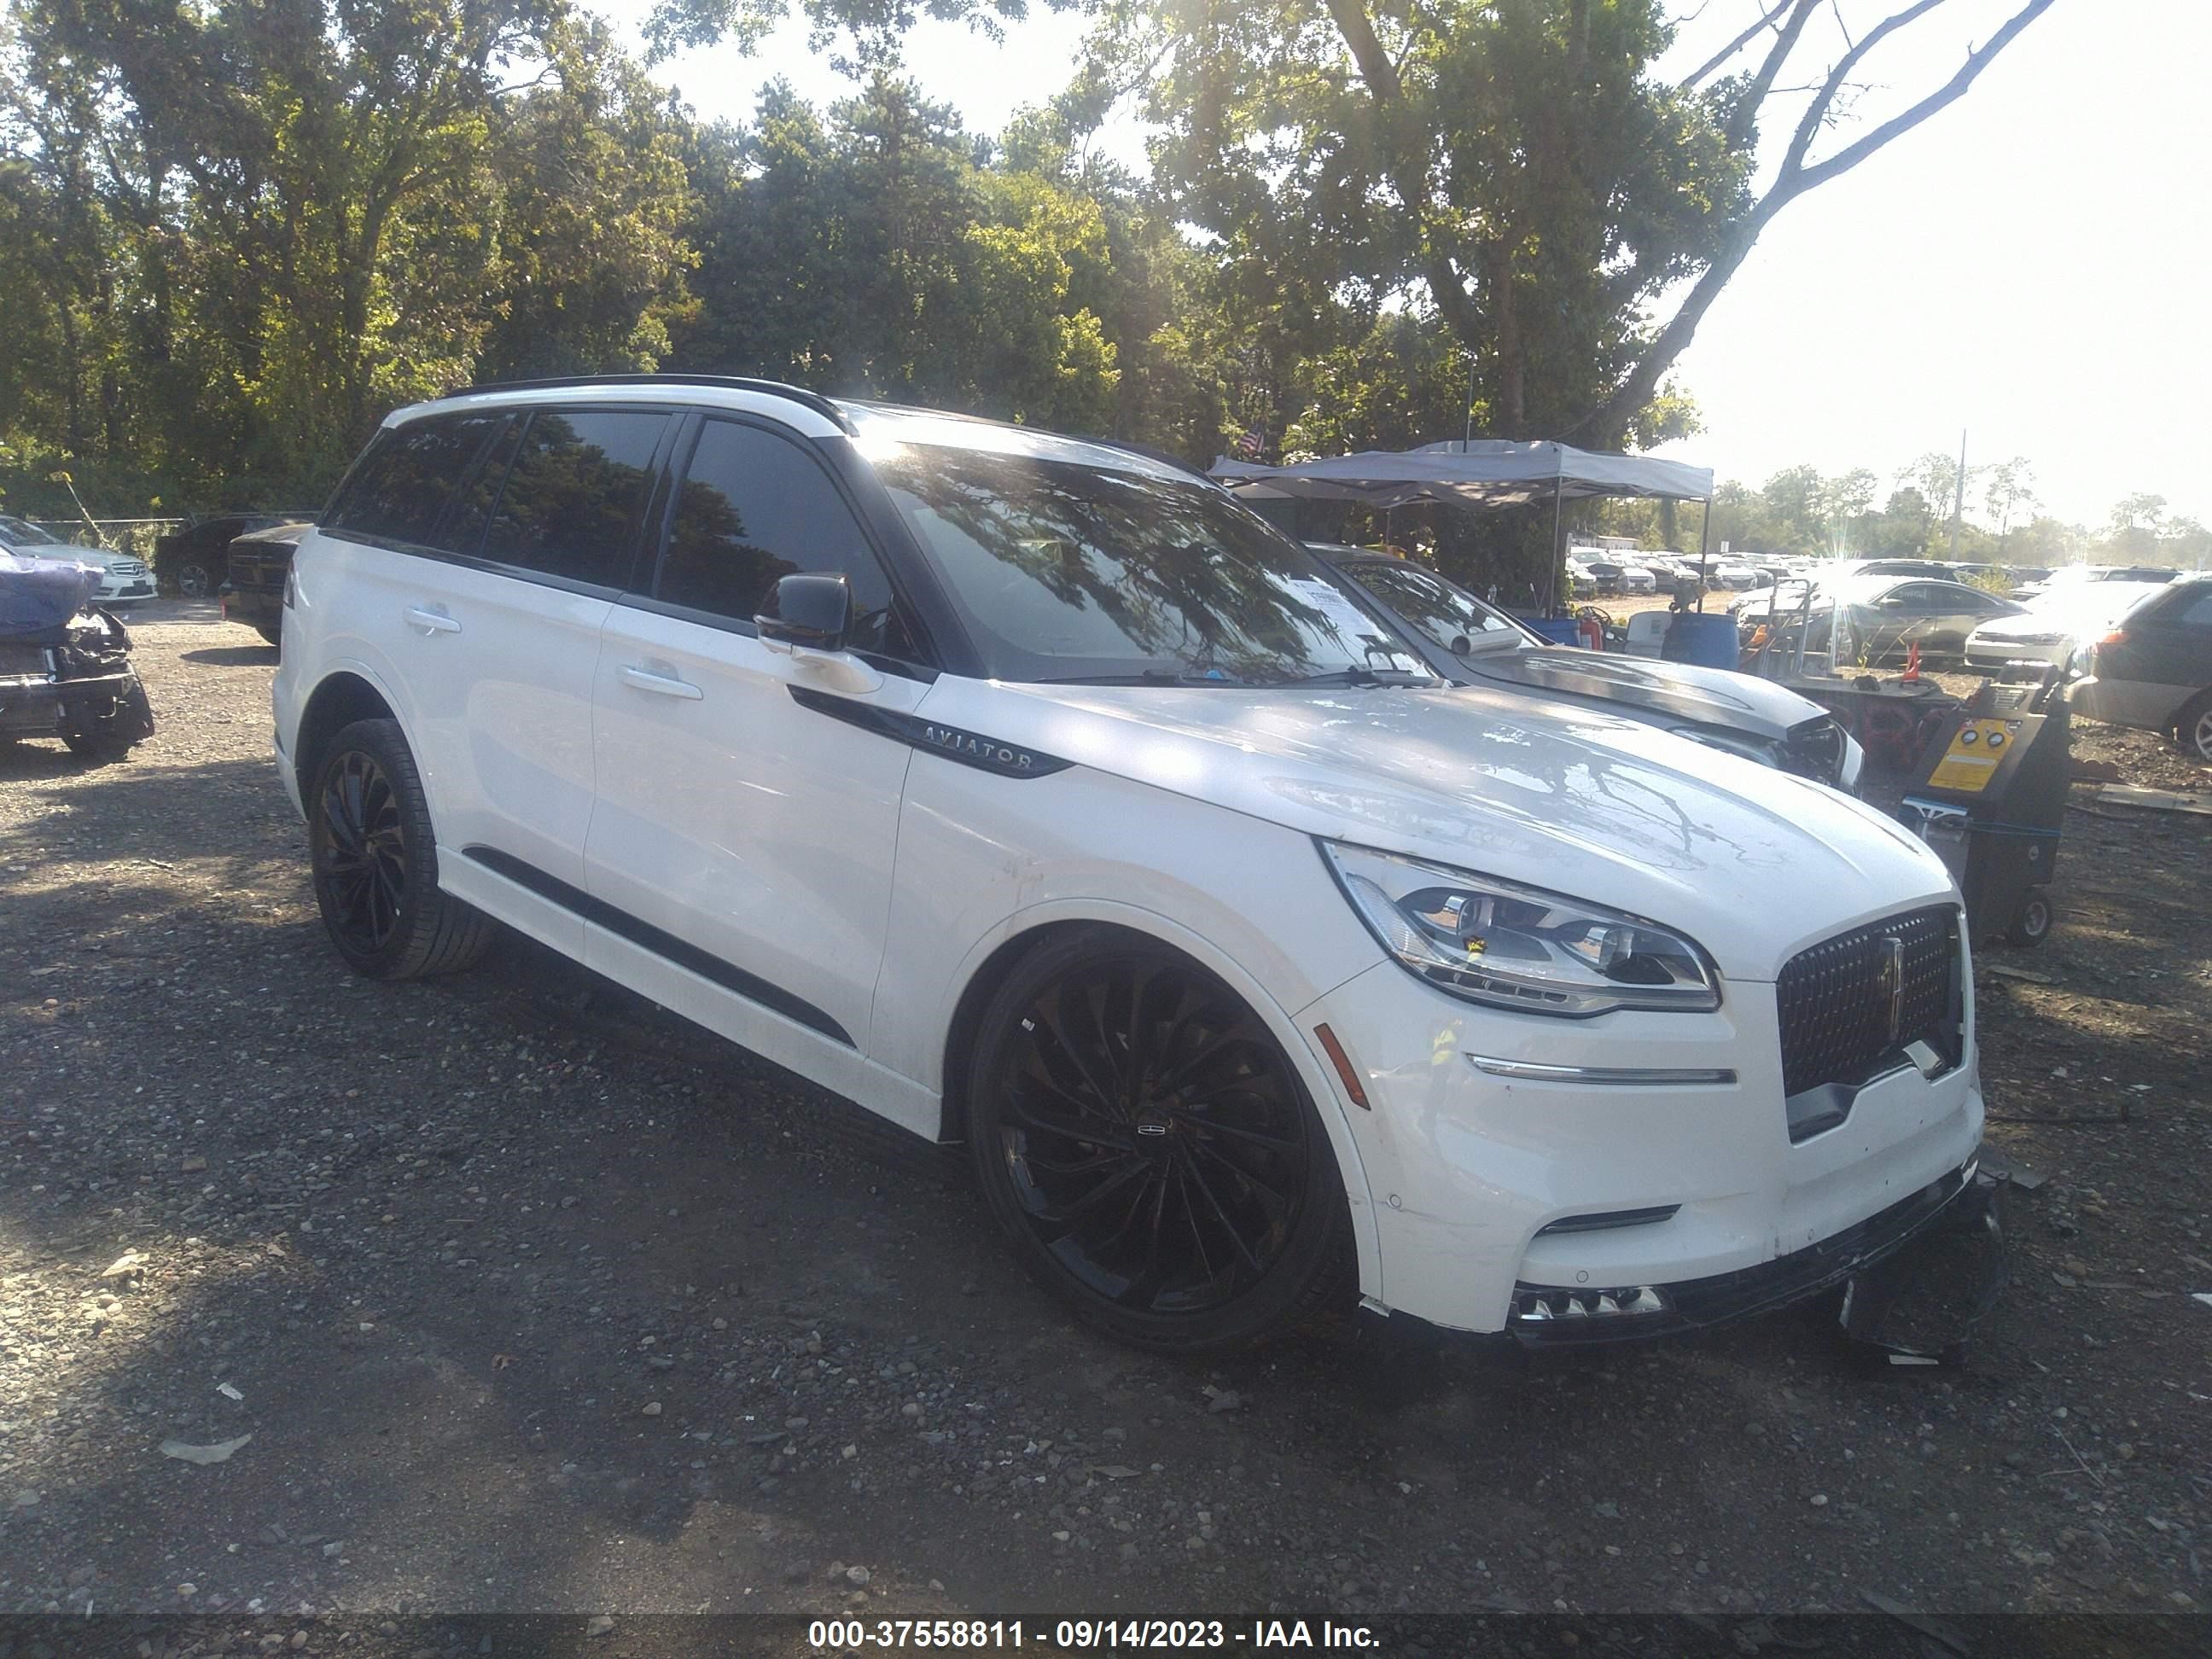 vin: 5LM5J9XC4PGL08399 5LM5J9XC4PGL08399 2023 lincoln aviator 0 for Sale in 11763, 21 Rice Ct, Medford, USA